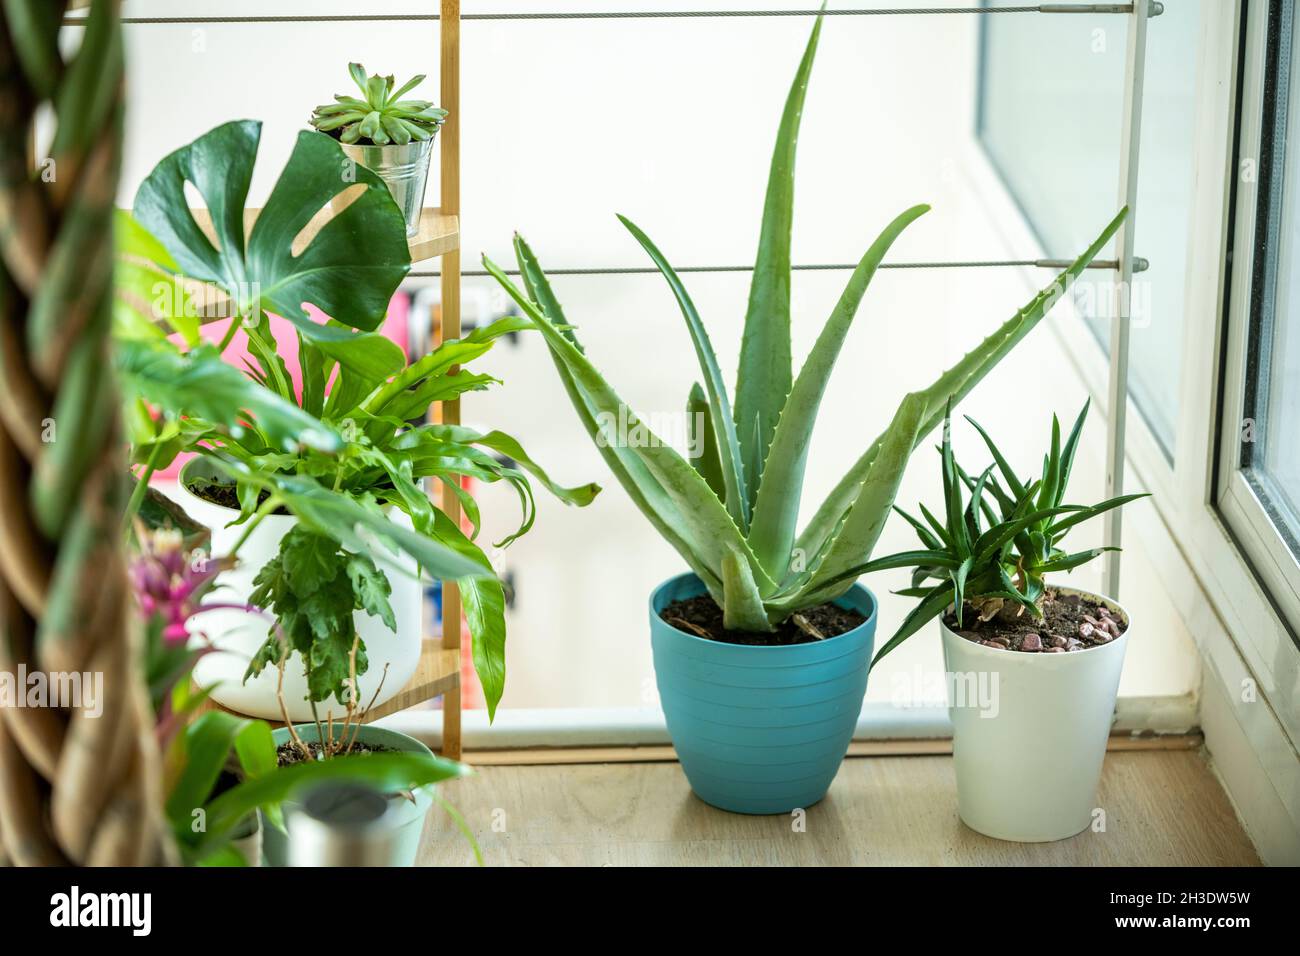 Hardy and pretty houseplants, aloes, pachira, bromeliads in apartment Stock Photo